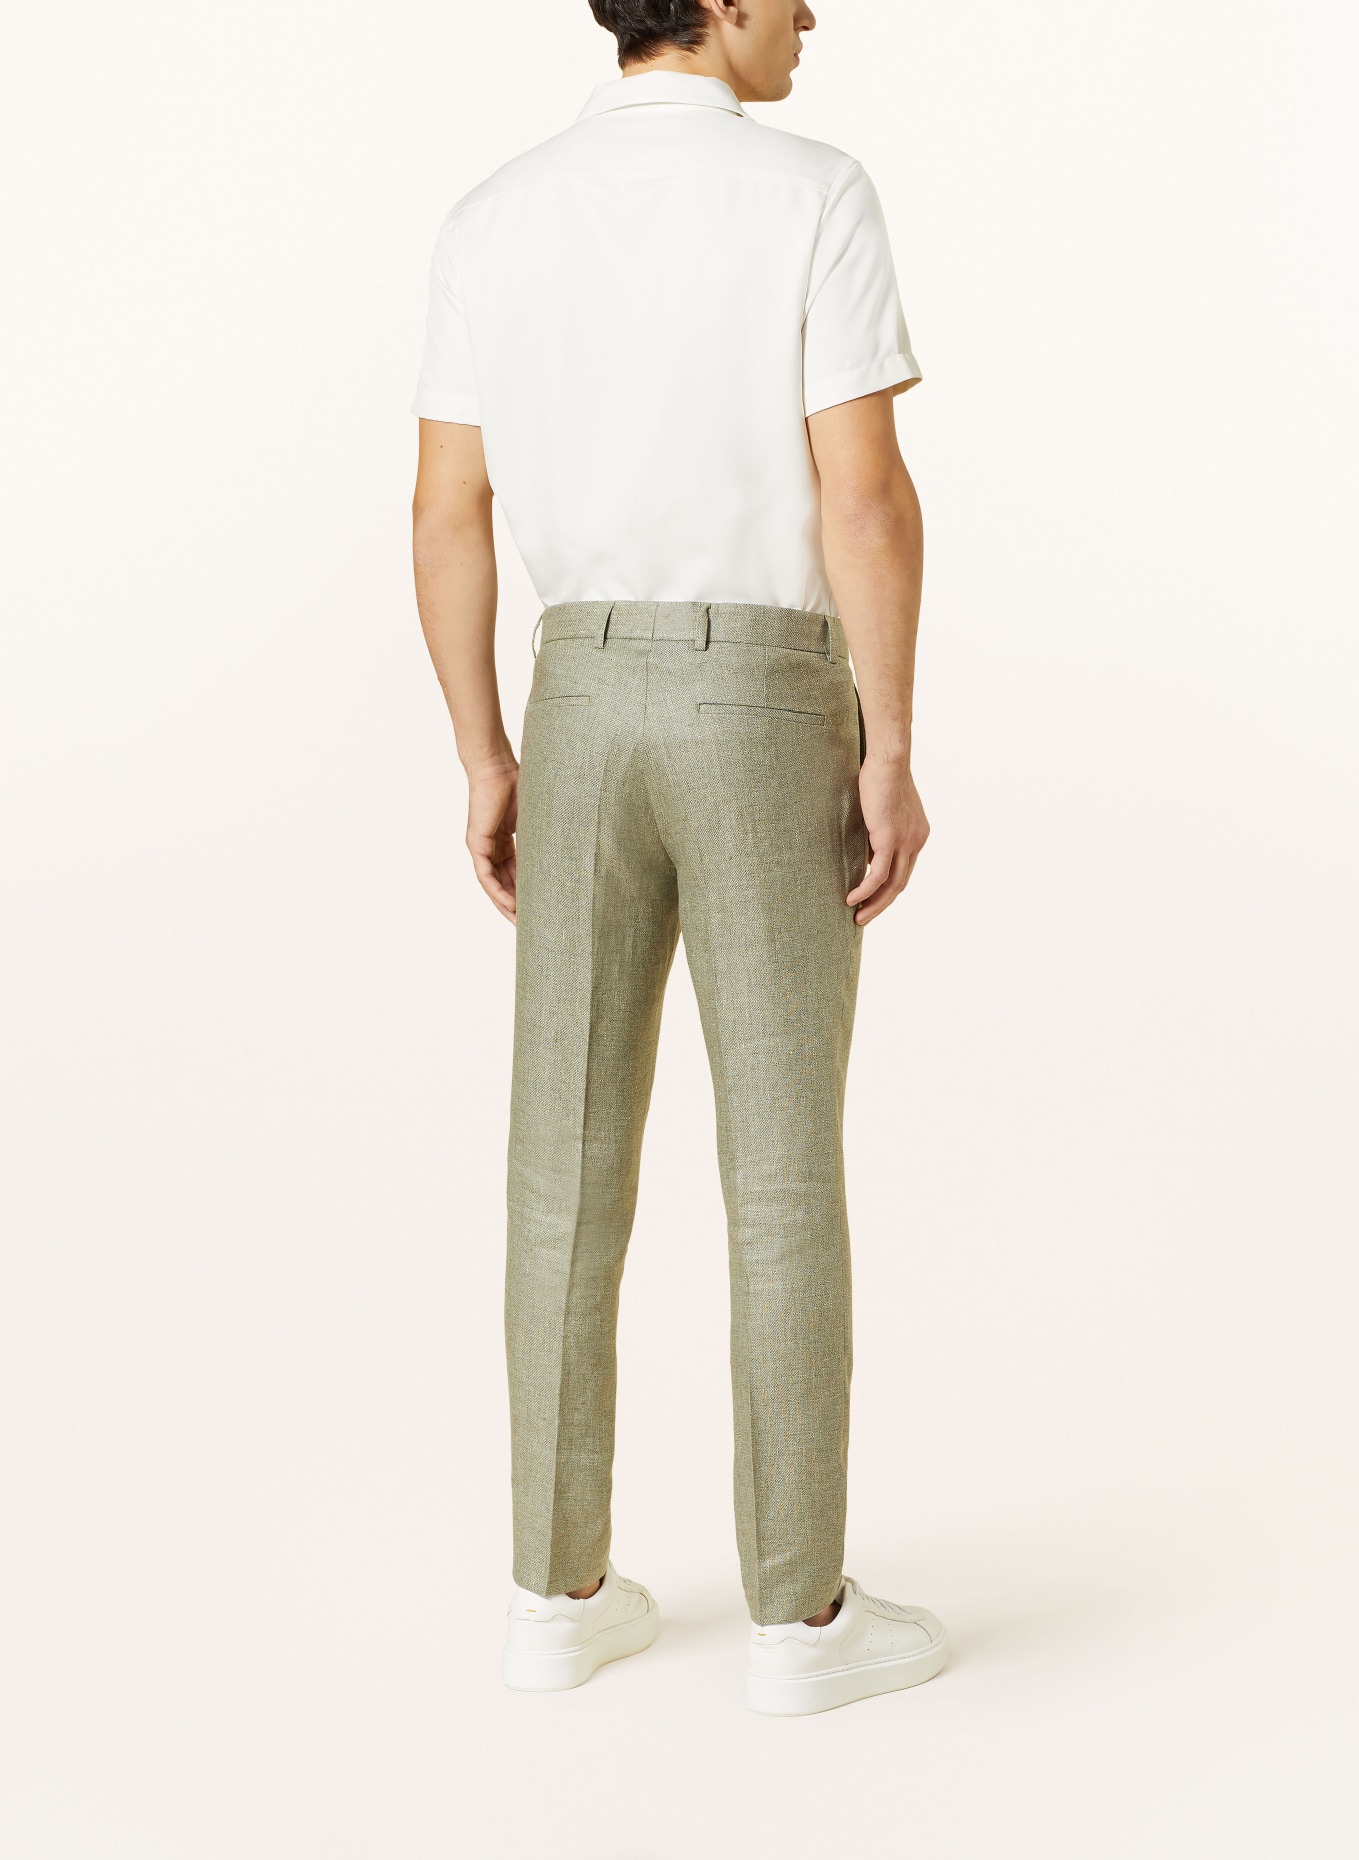 CG - CLUB of GENTS Suit trousers CG PACO slim fit with linen, Color: 52 gruen mittel (Image 4)